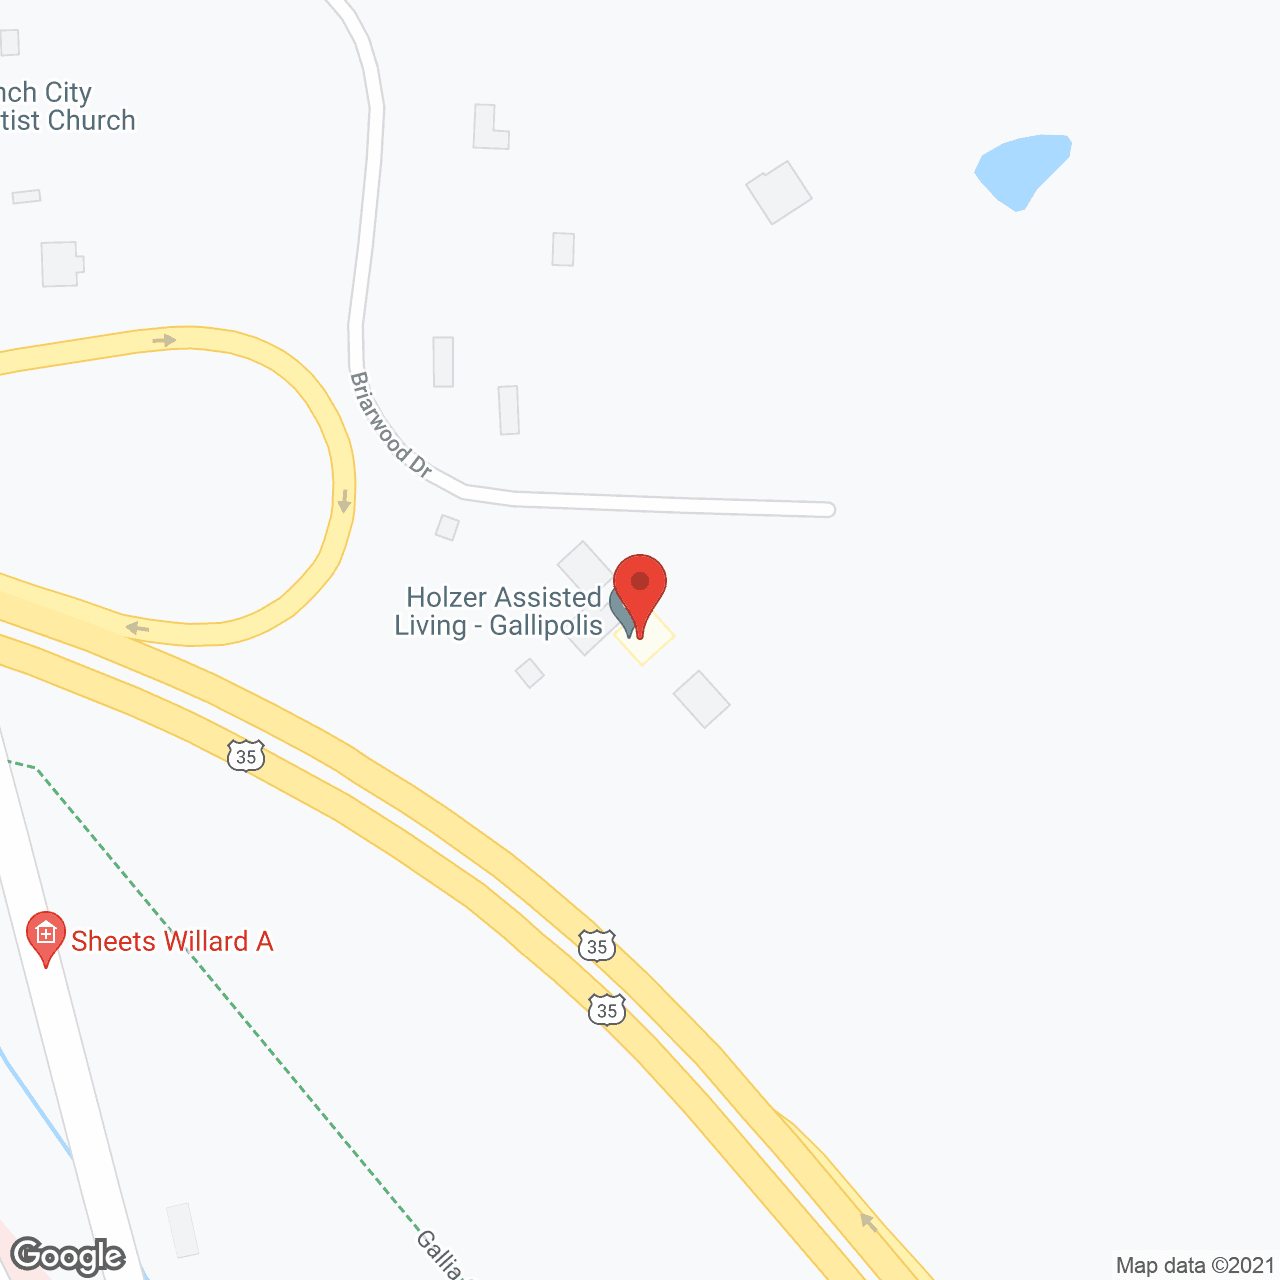 Holzer Assisted Living-Gallipolis in google map